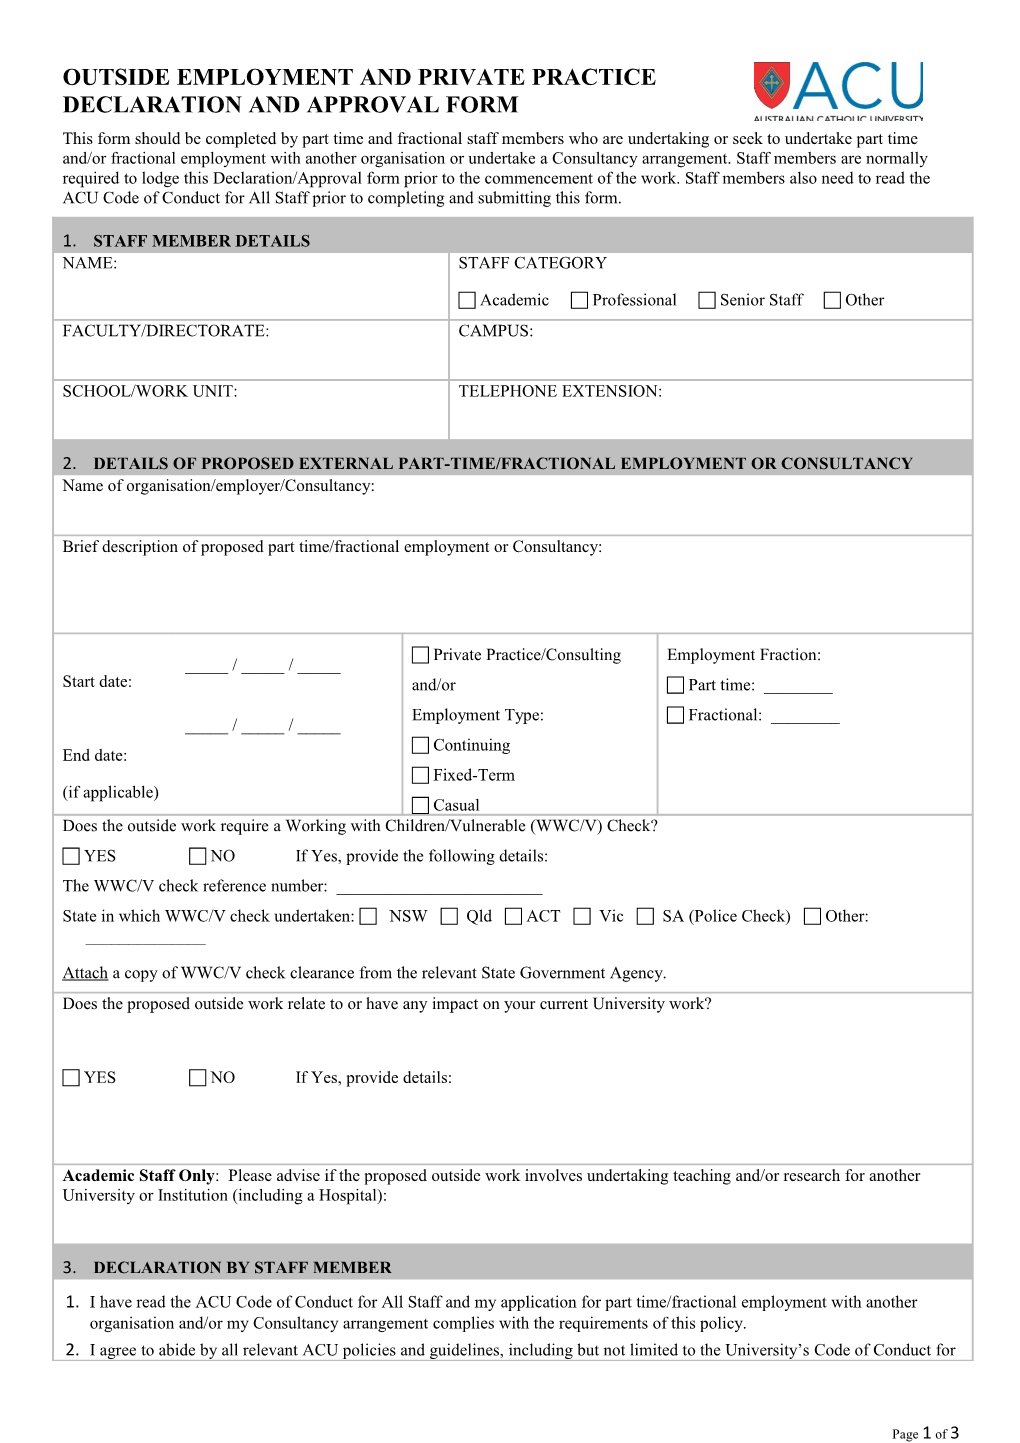 Declaration and Approval Form